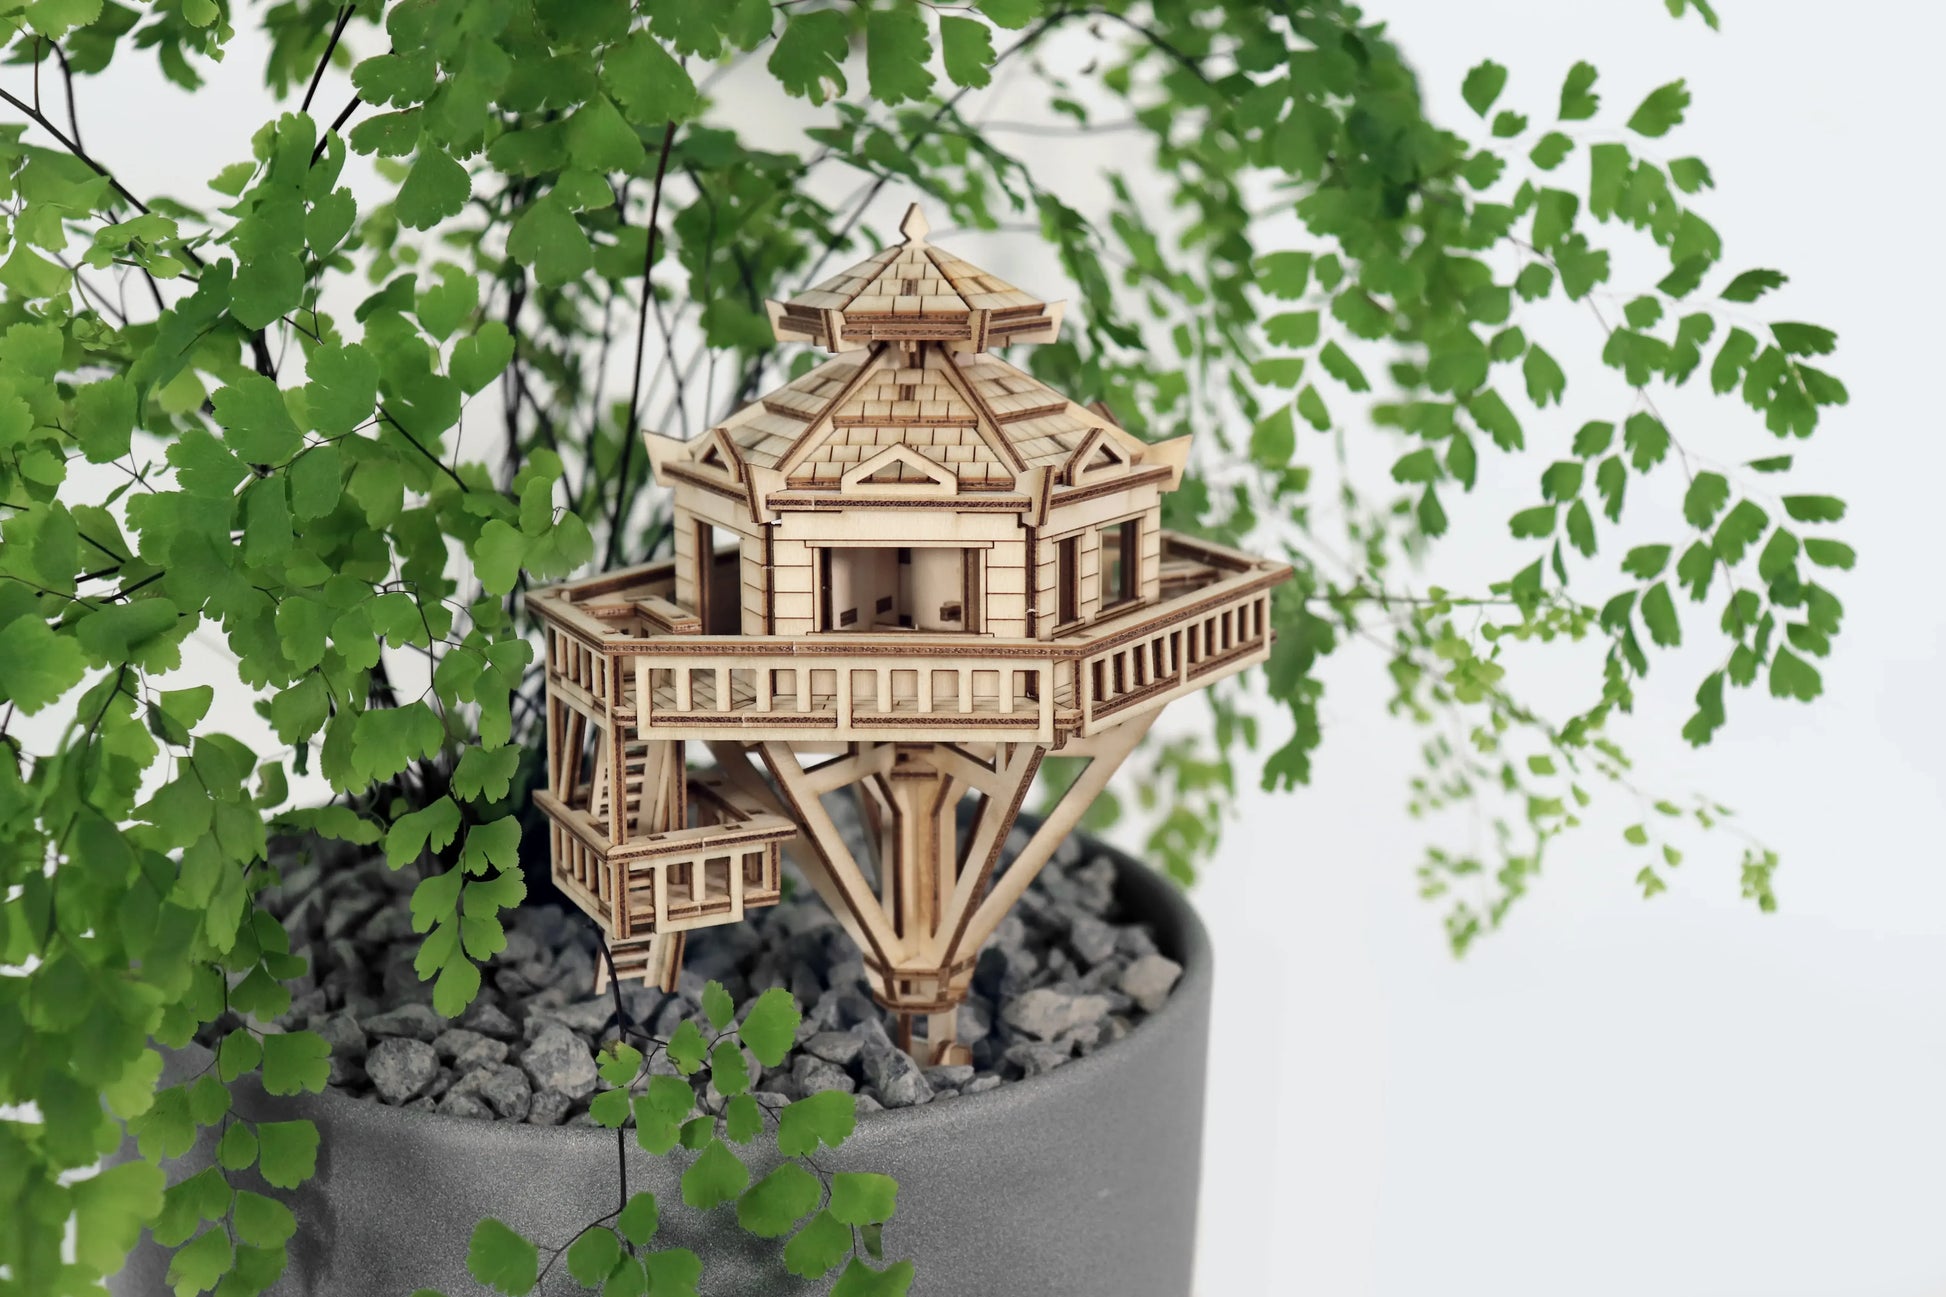 Small wooden treehouse in a potted plant.